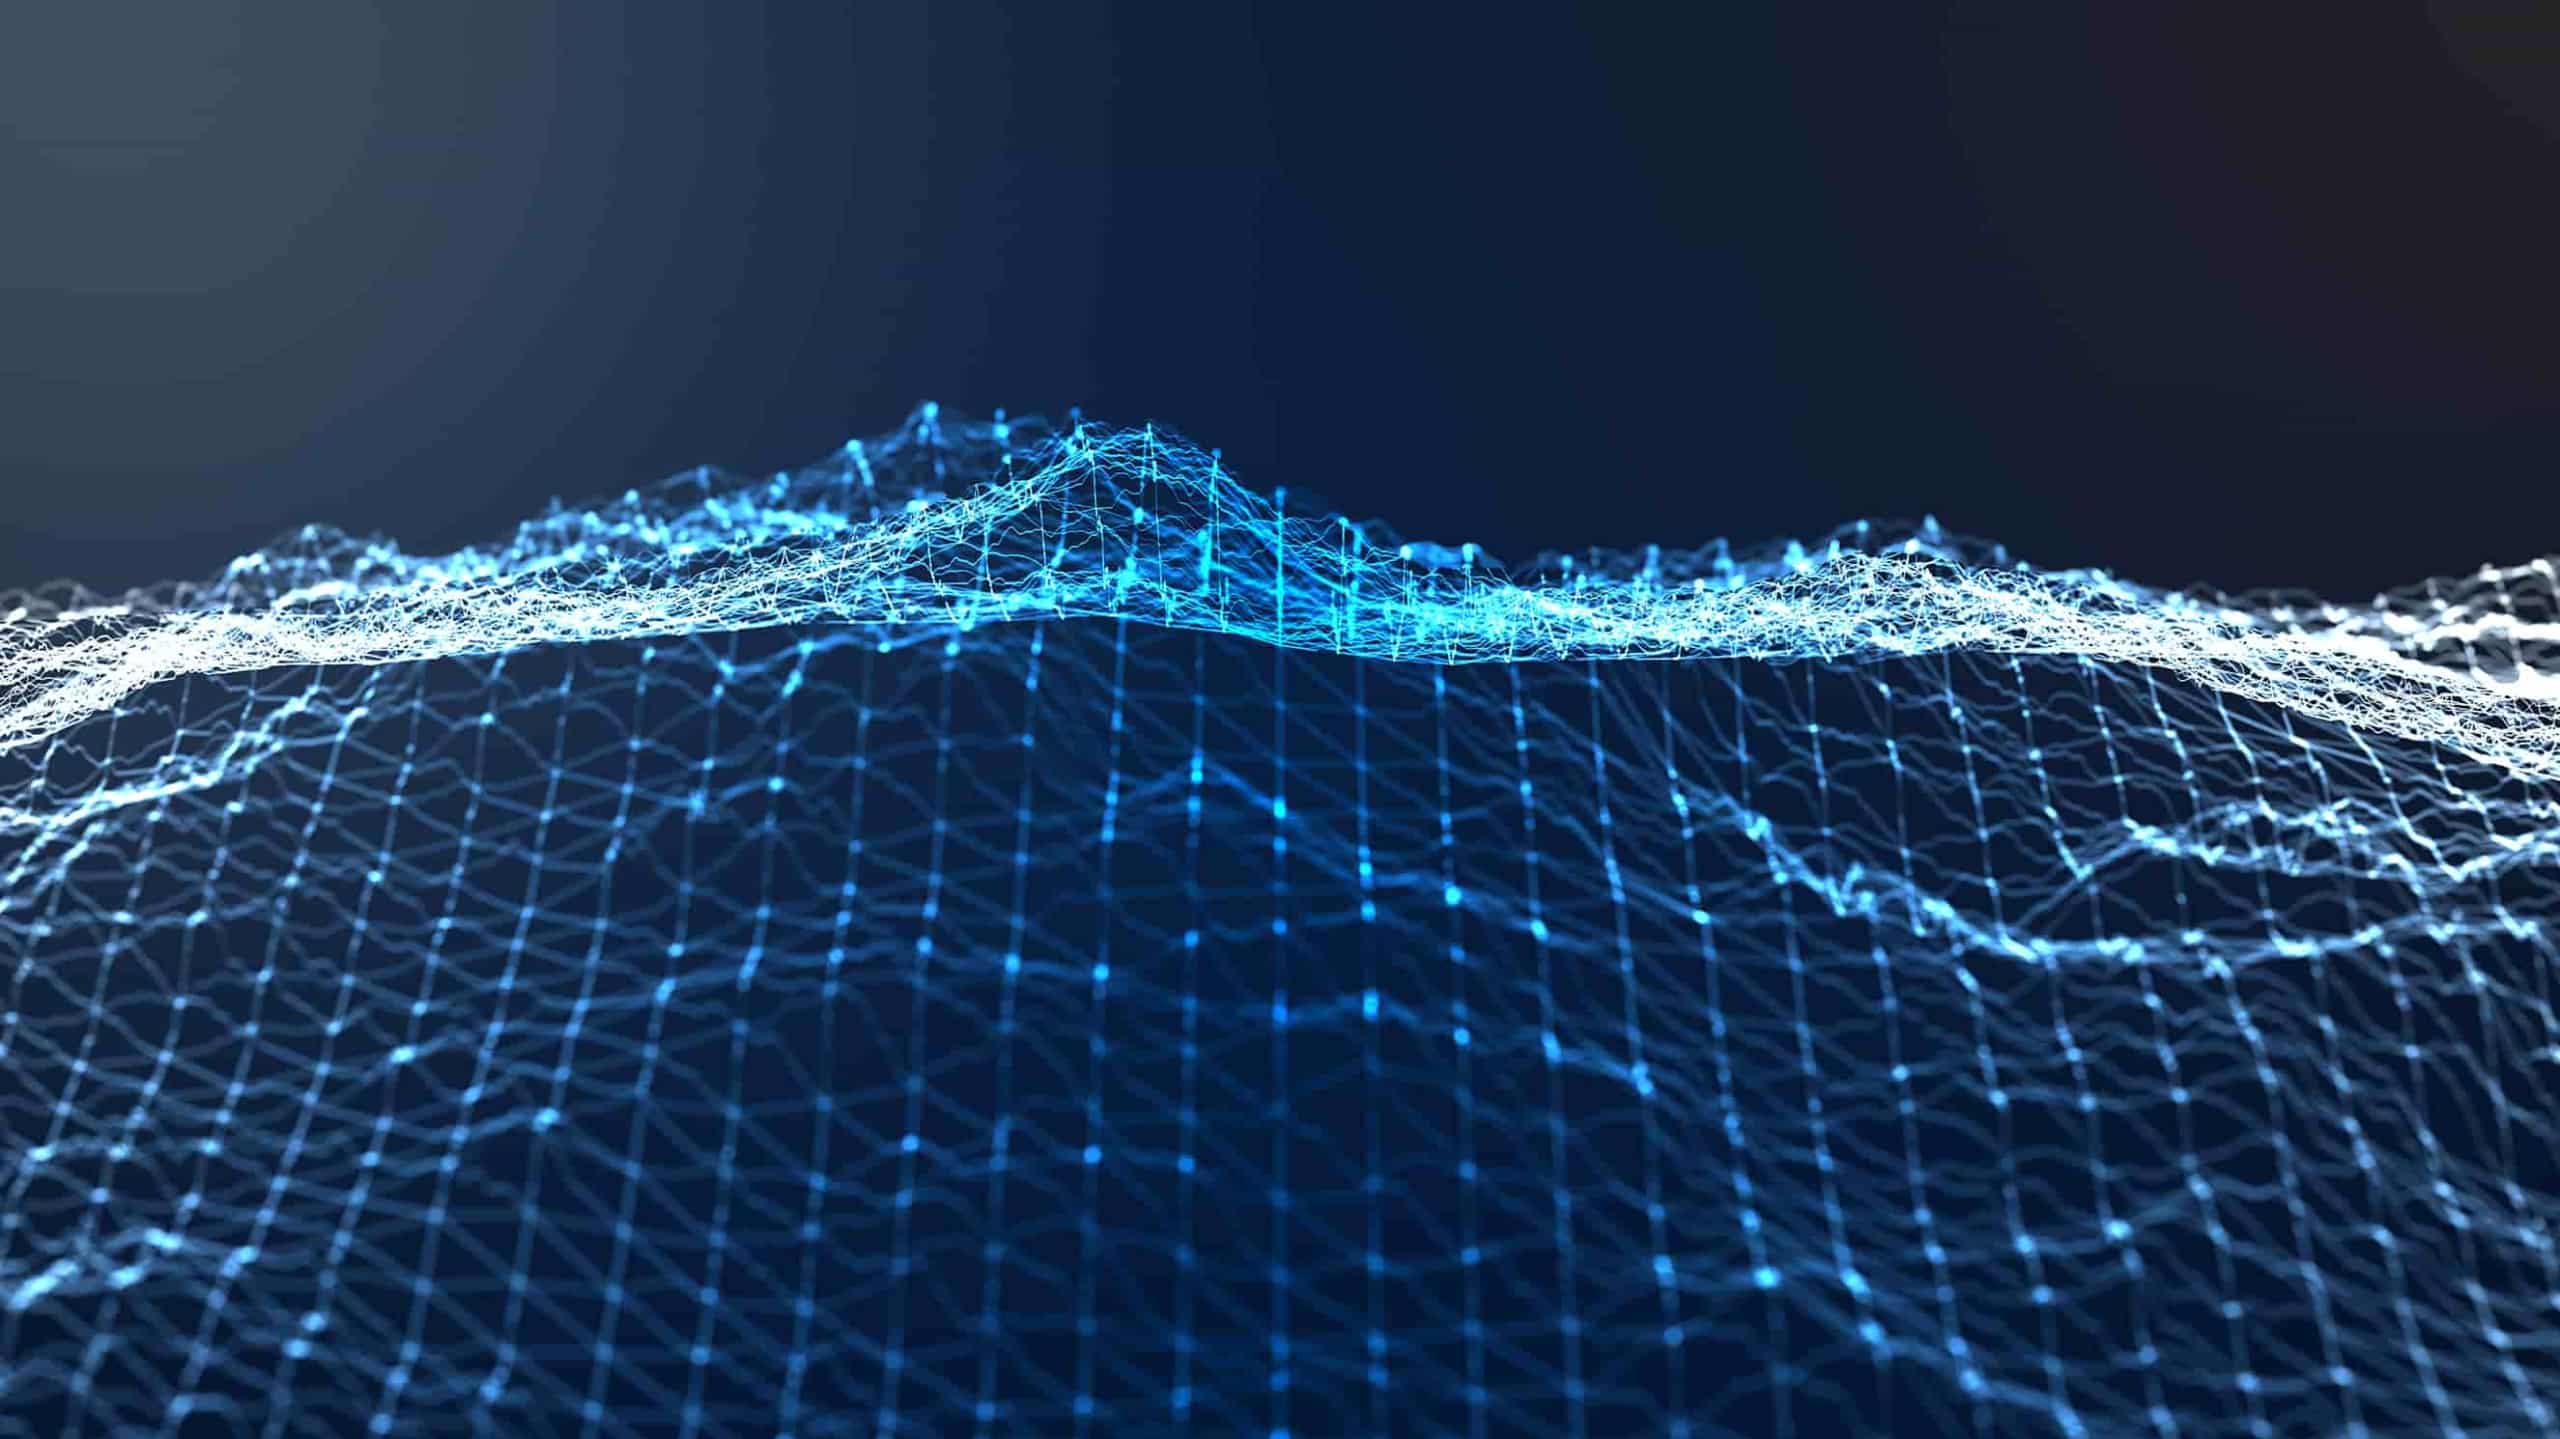 Abstract digital image showing a 3d mesh landscape in shades of blue, resembling a glowing, undulating digital ocean against a dark background.